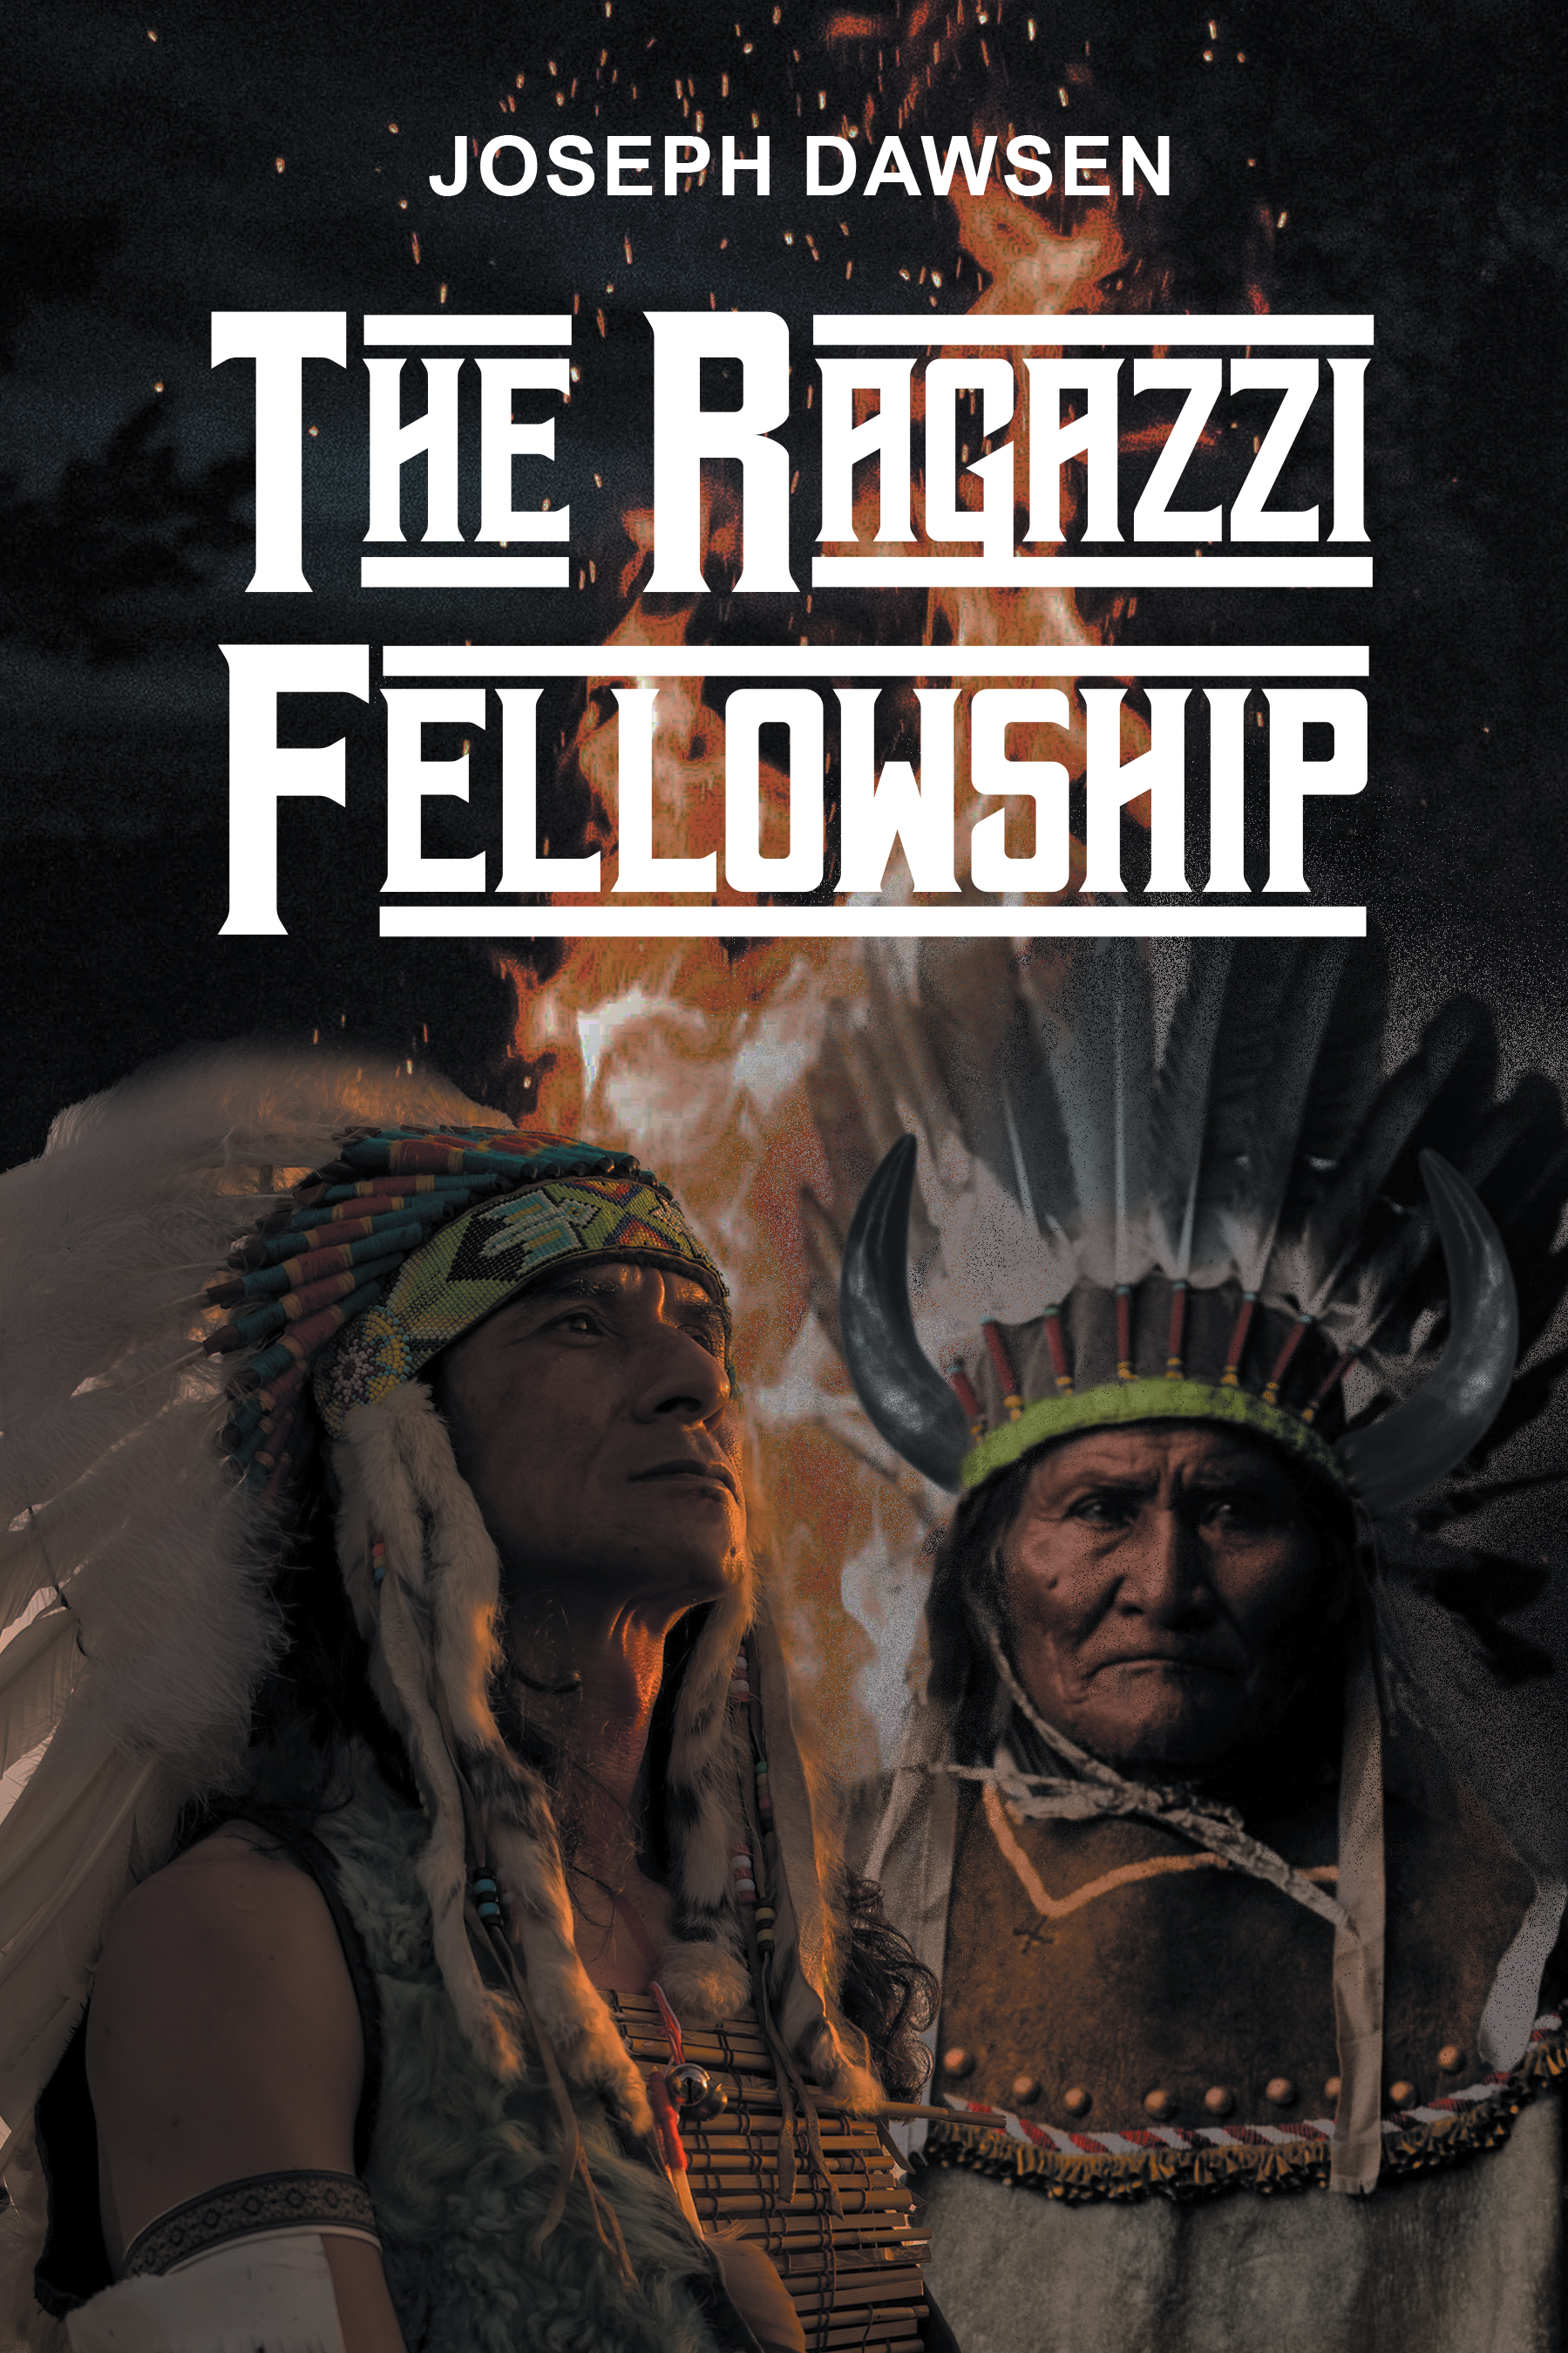 Author Joseph Dawnsen’s New Book, "The Ragazzi Fellowship," is a Thrilling Story of a Boy Scout Camp and the Adventures One Summer Can Contain